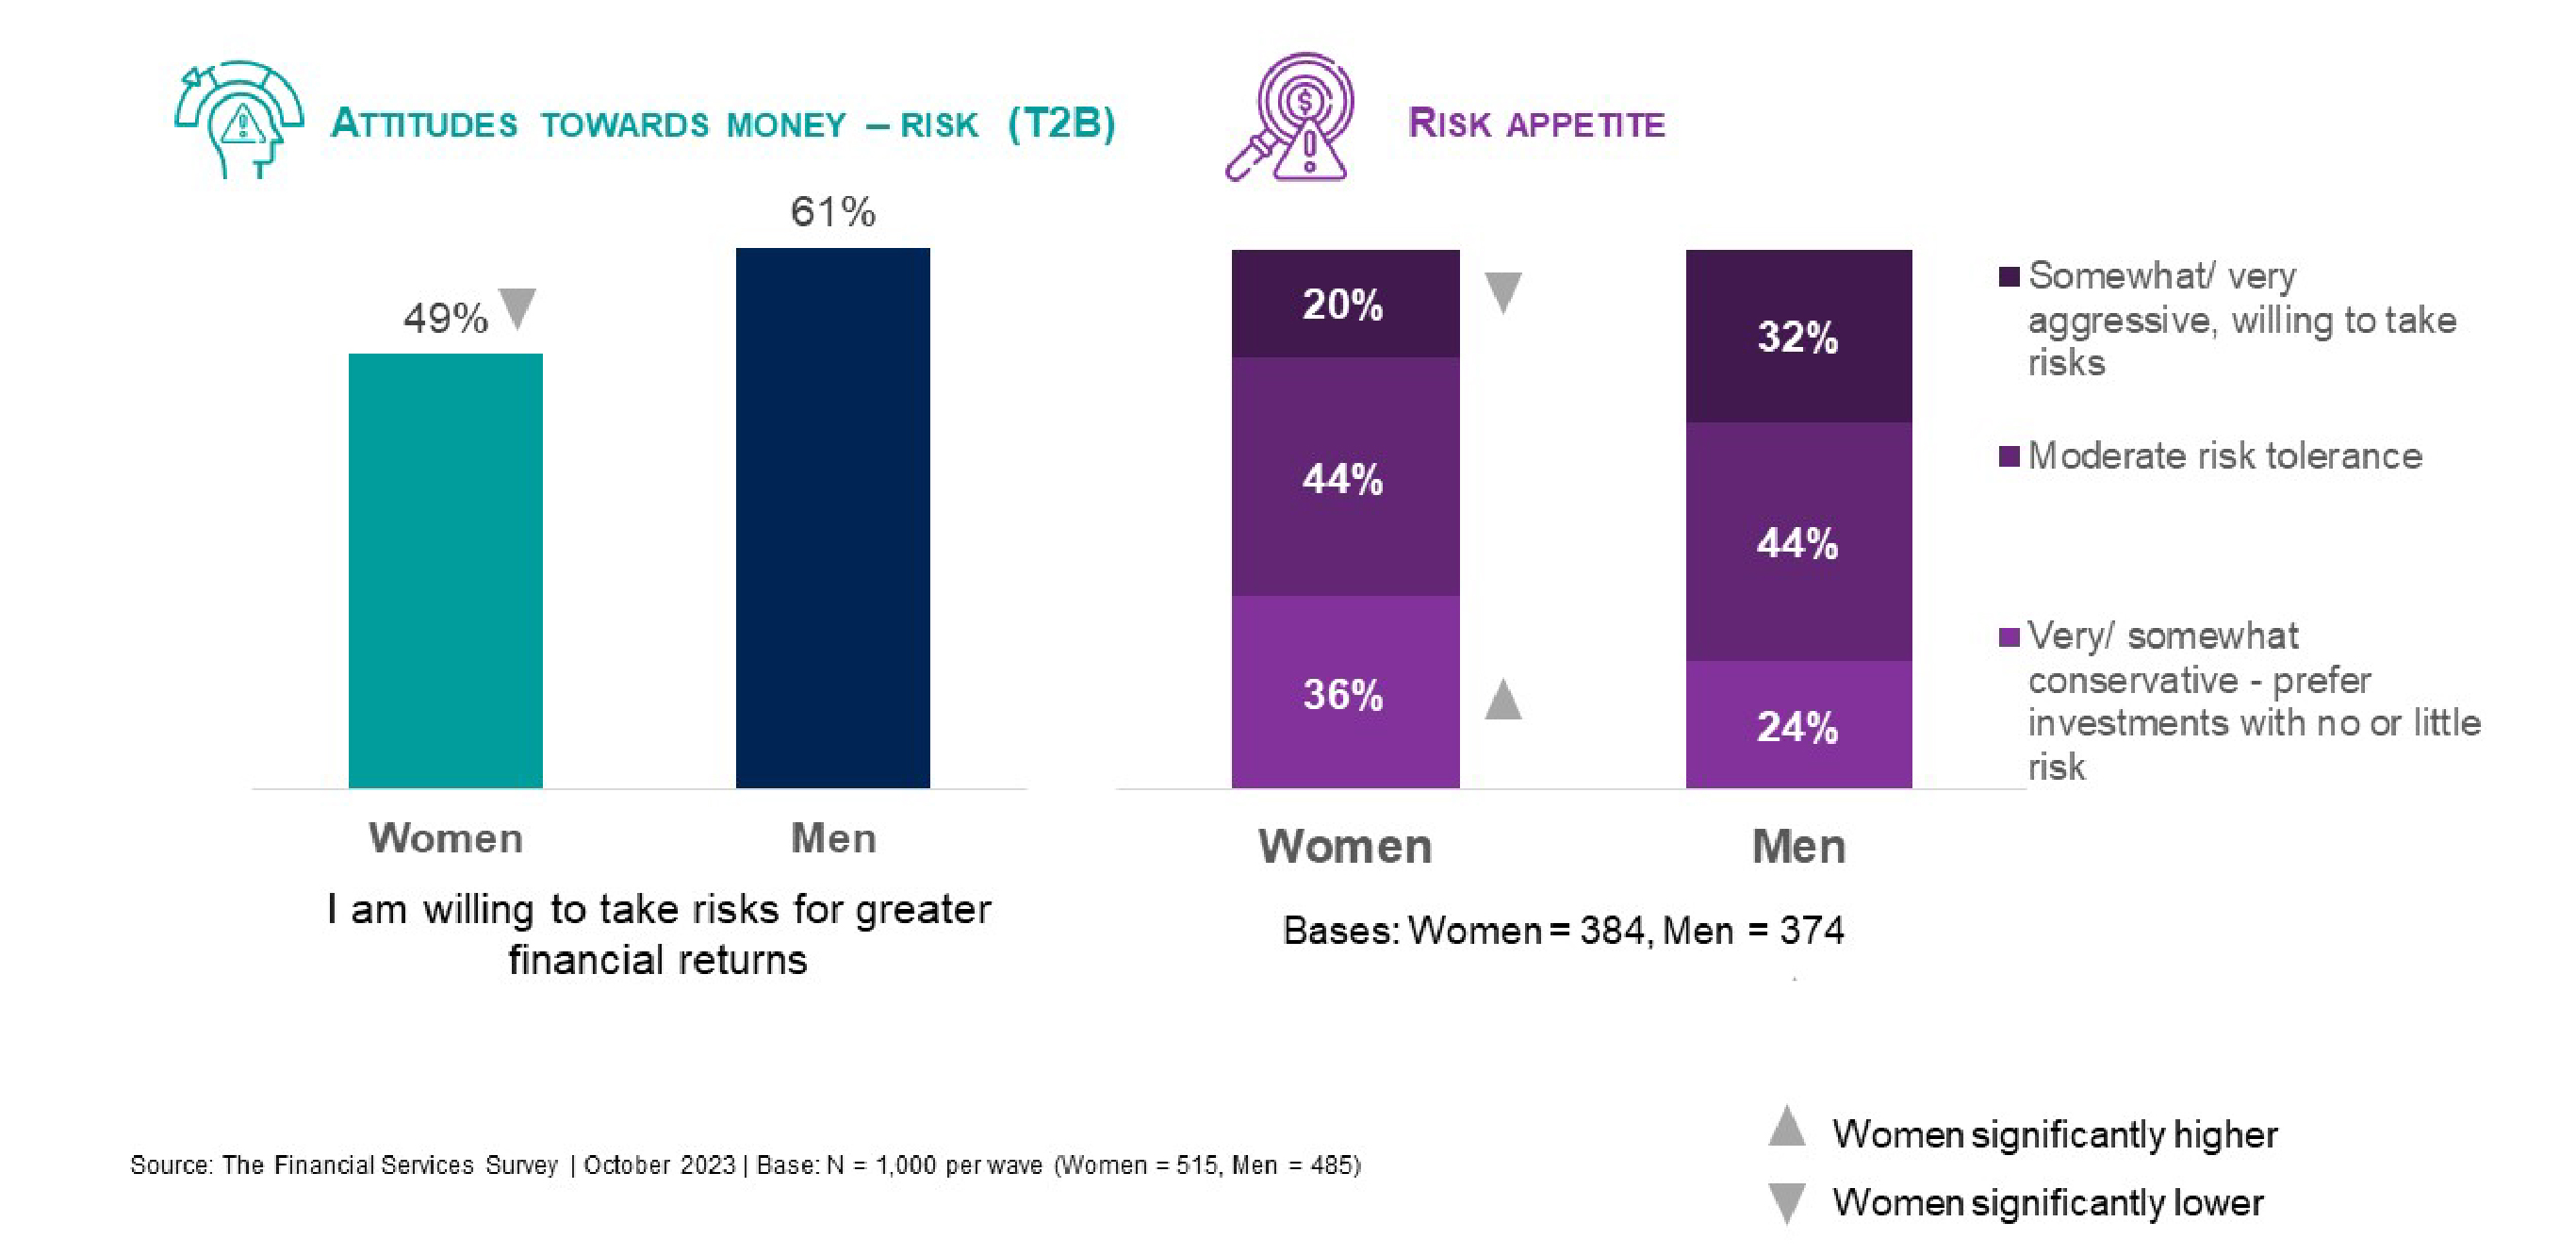 While Hong Kong women earn 10% less than men, they hold relatively more liquid assets.